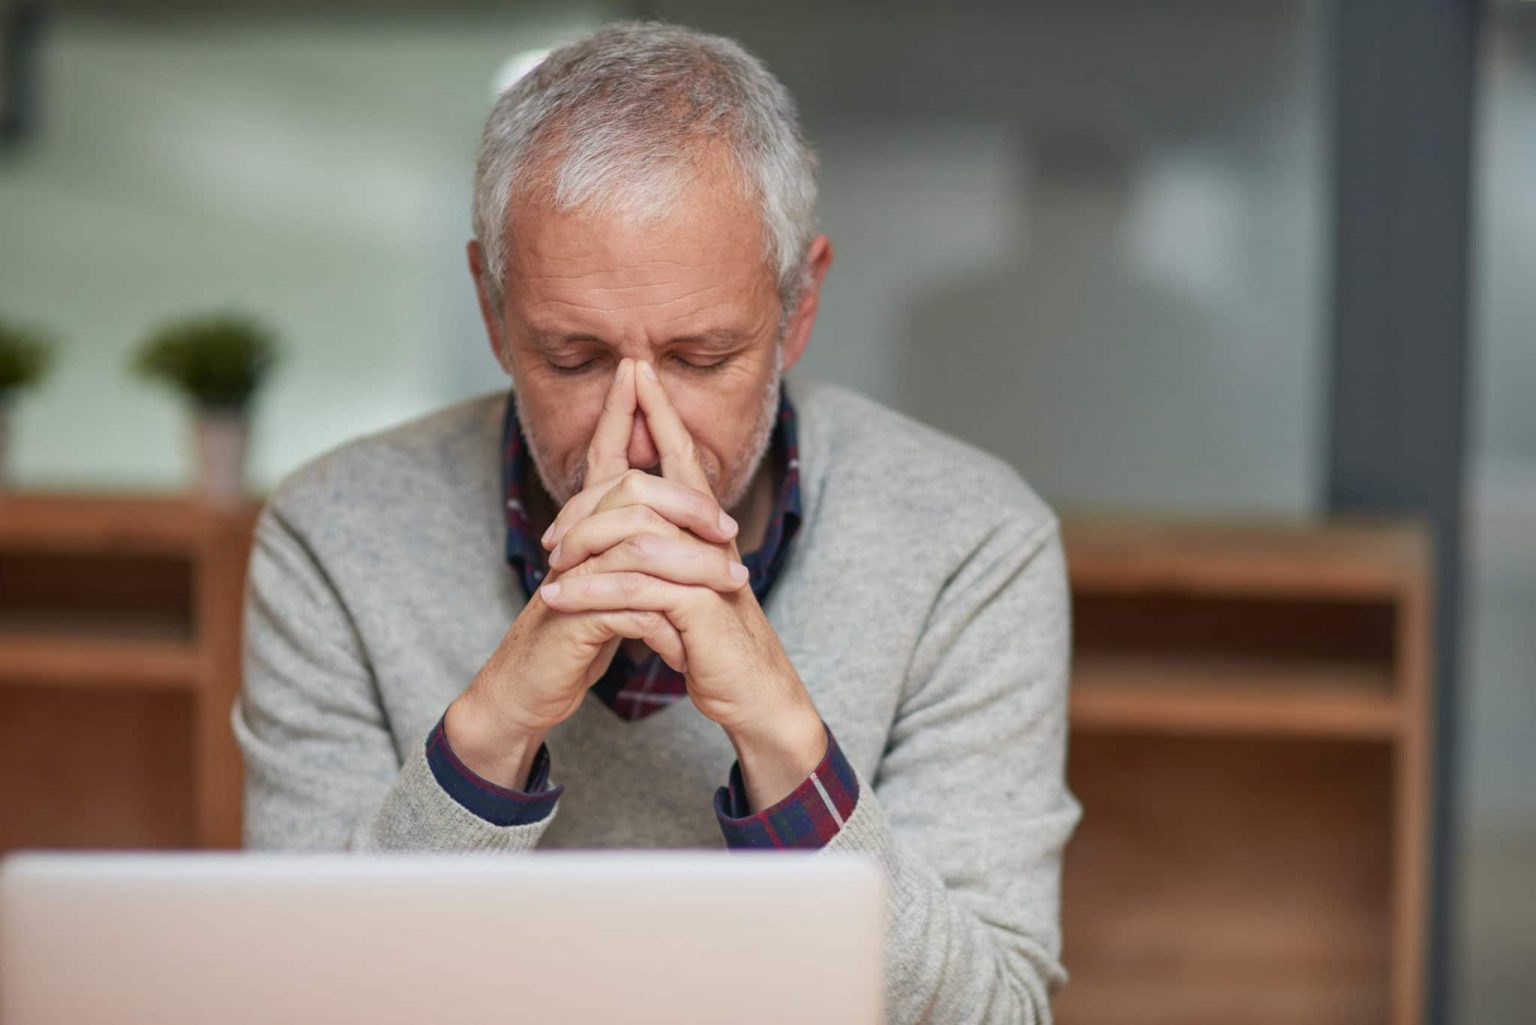 Older man has his hands clasped together with index fingers on bridge of nose